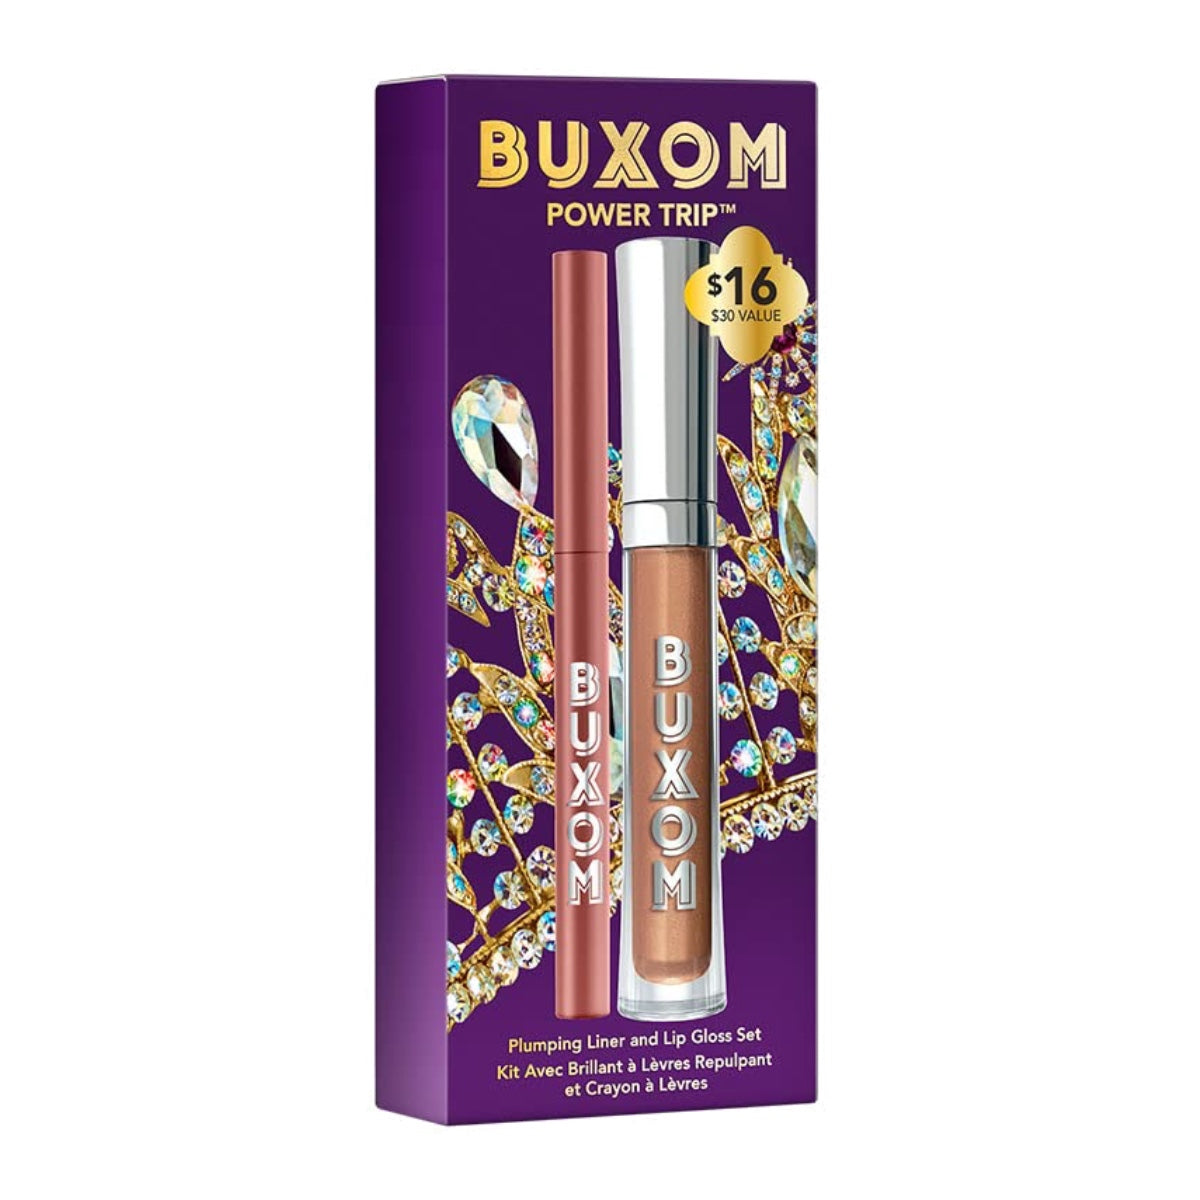 Buxom Power Trip Plumping Liner and Lip Gloss Set